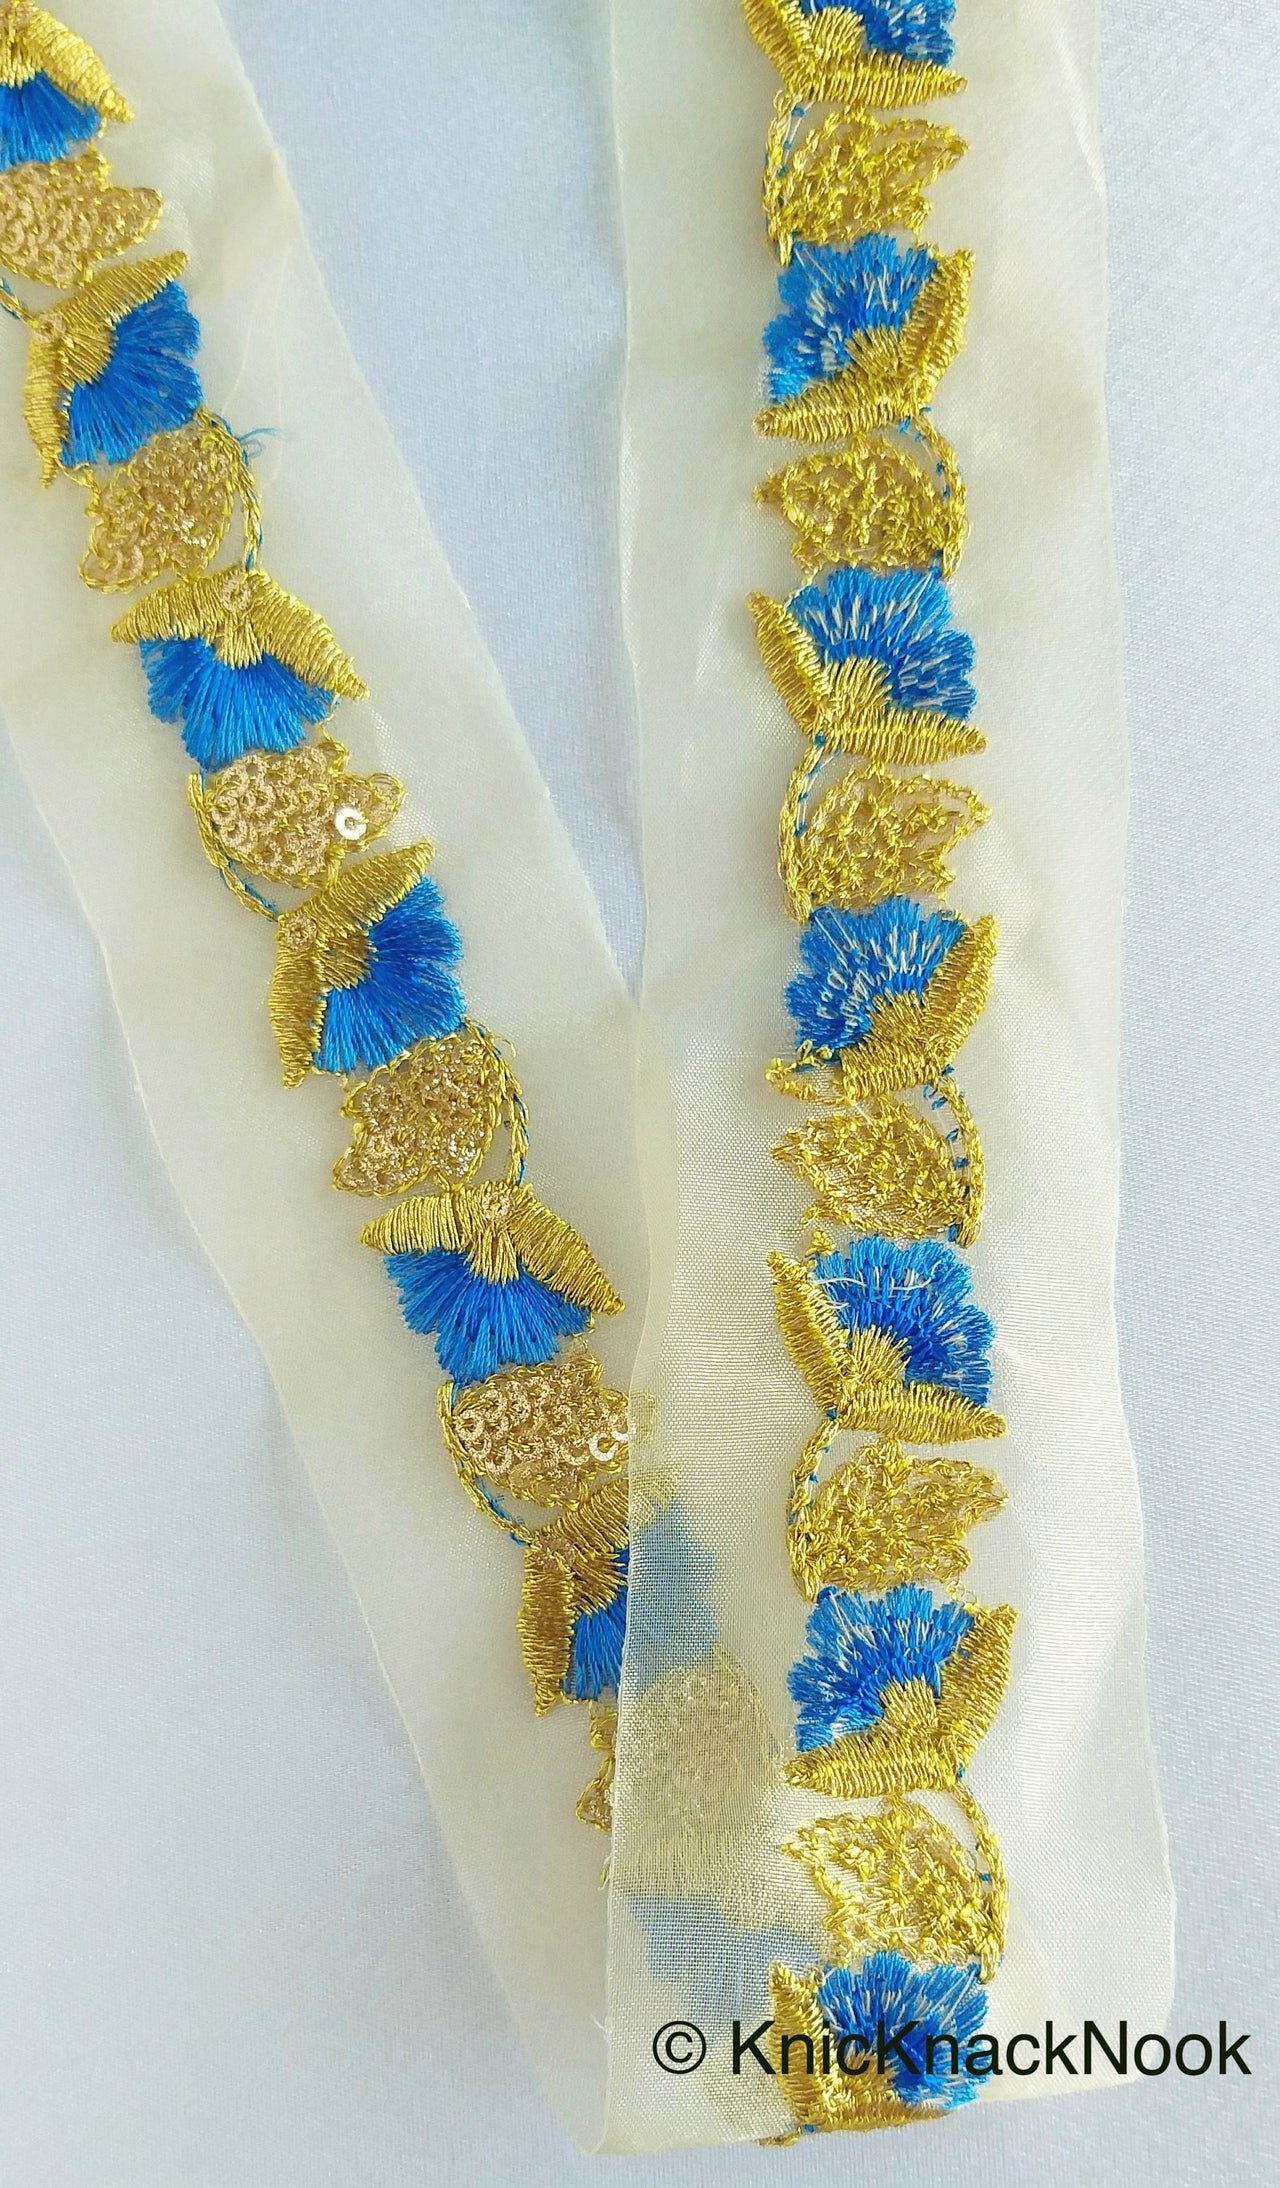 Gold Sheer Trim In Gold And Blue / Green Floral Embroidery And Gold Sequins Embellishment, Approx. 45mm Wide - 210119L135 / 36Trim